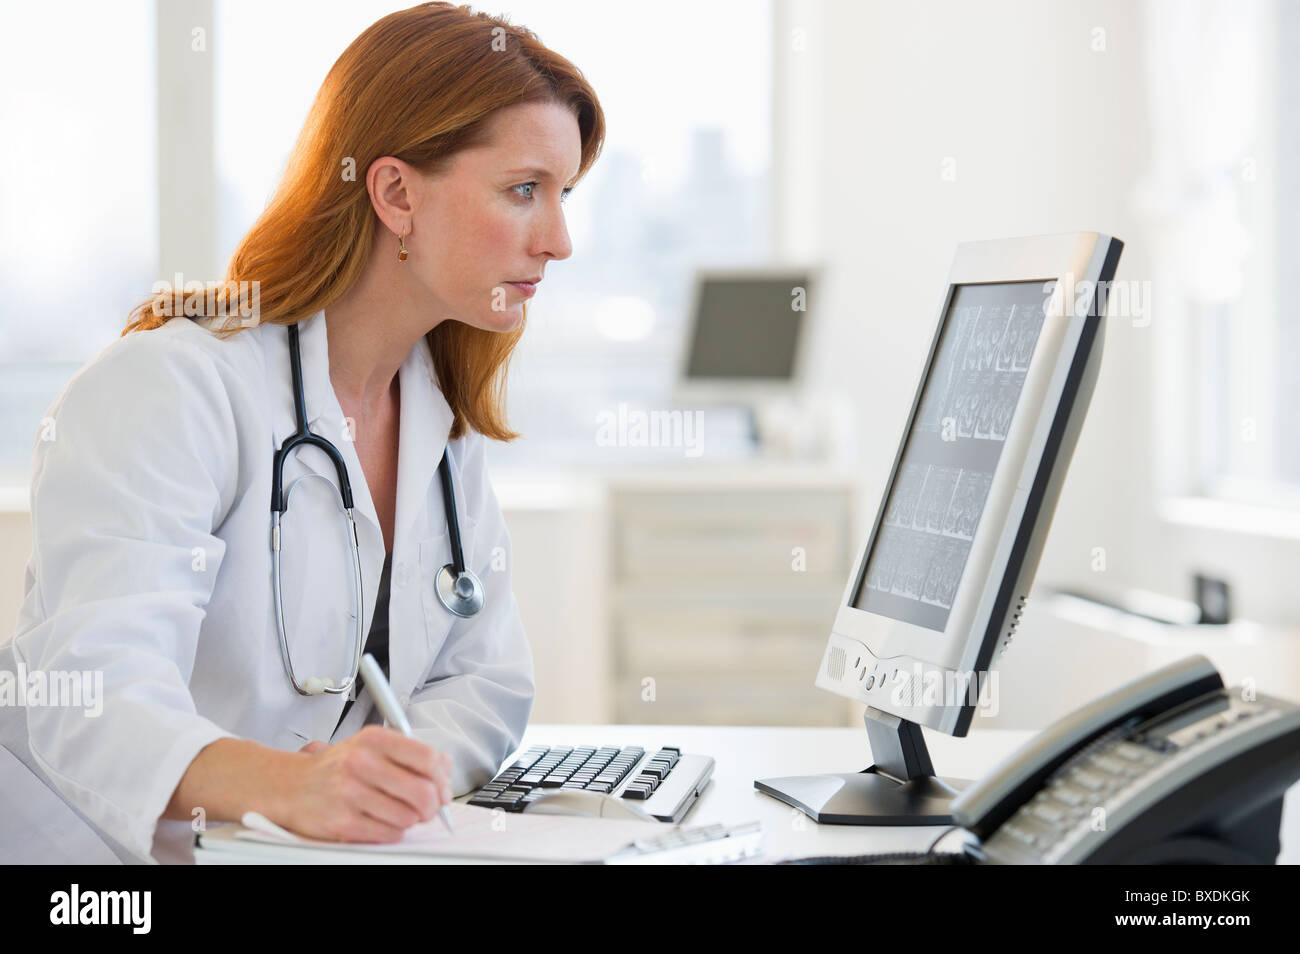 Doctor working at computer Stock Photo